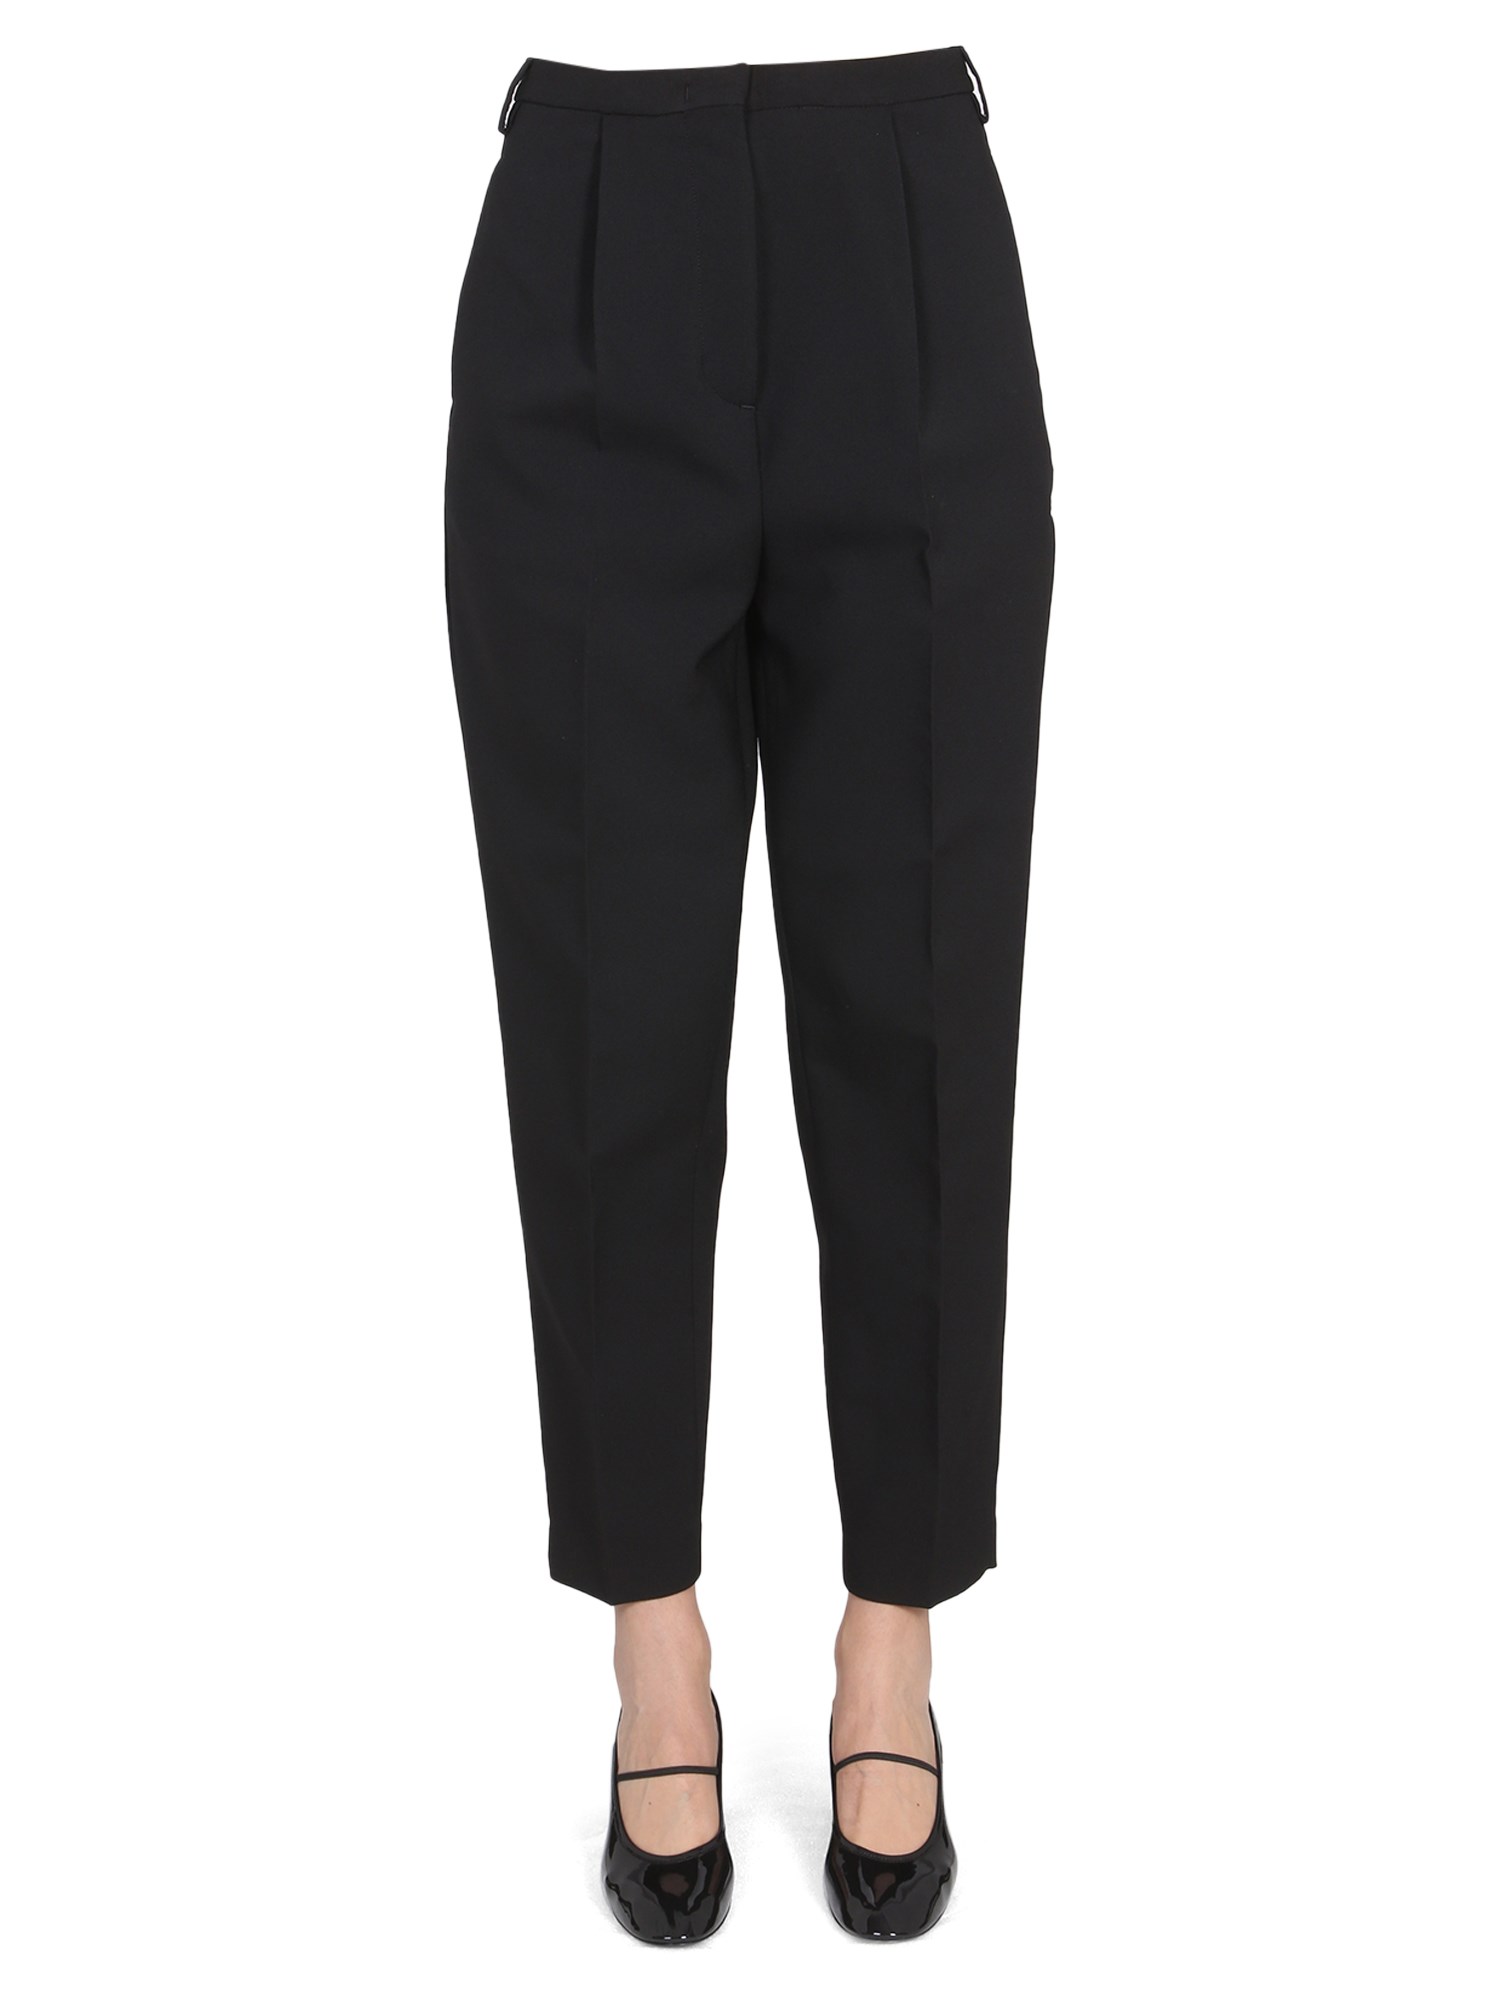 department five cropped pants